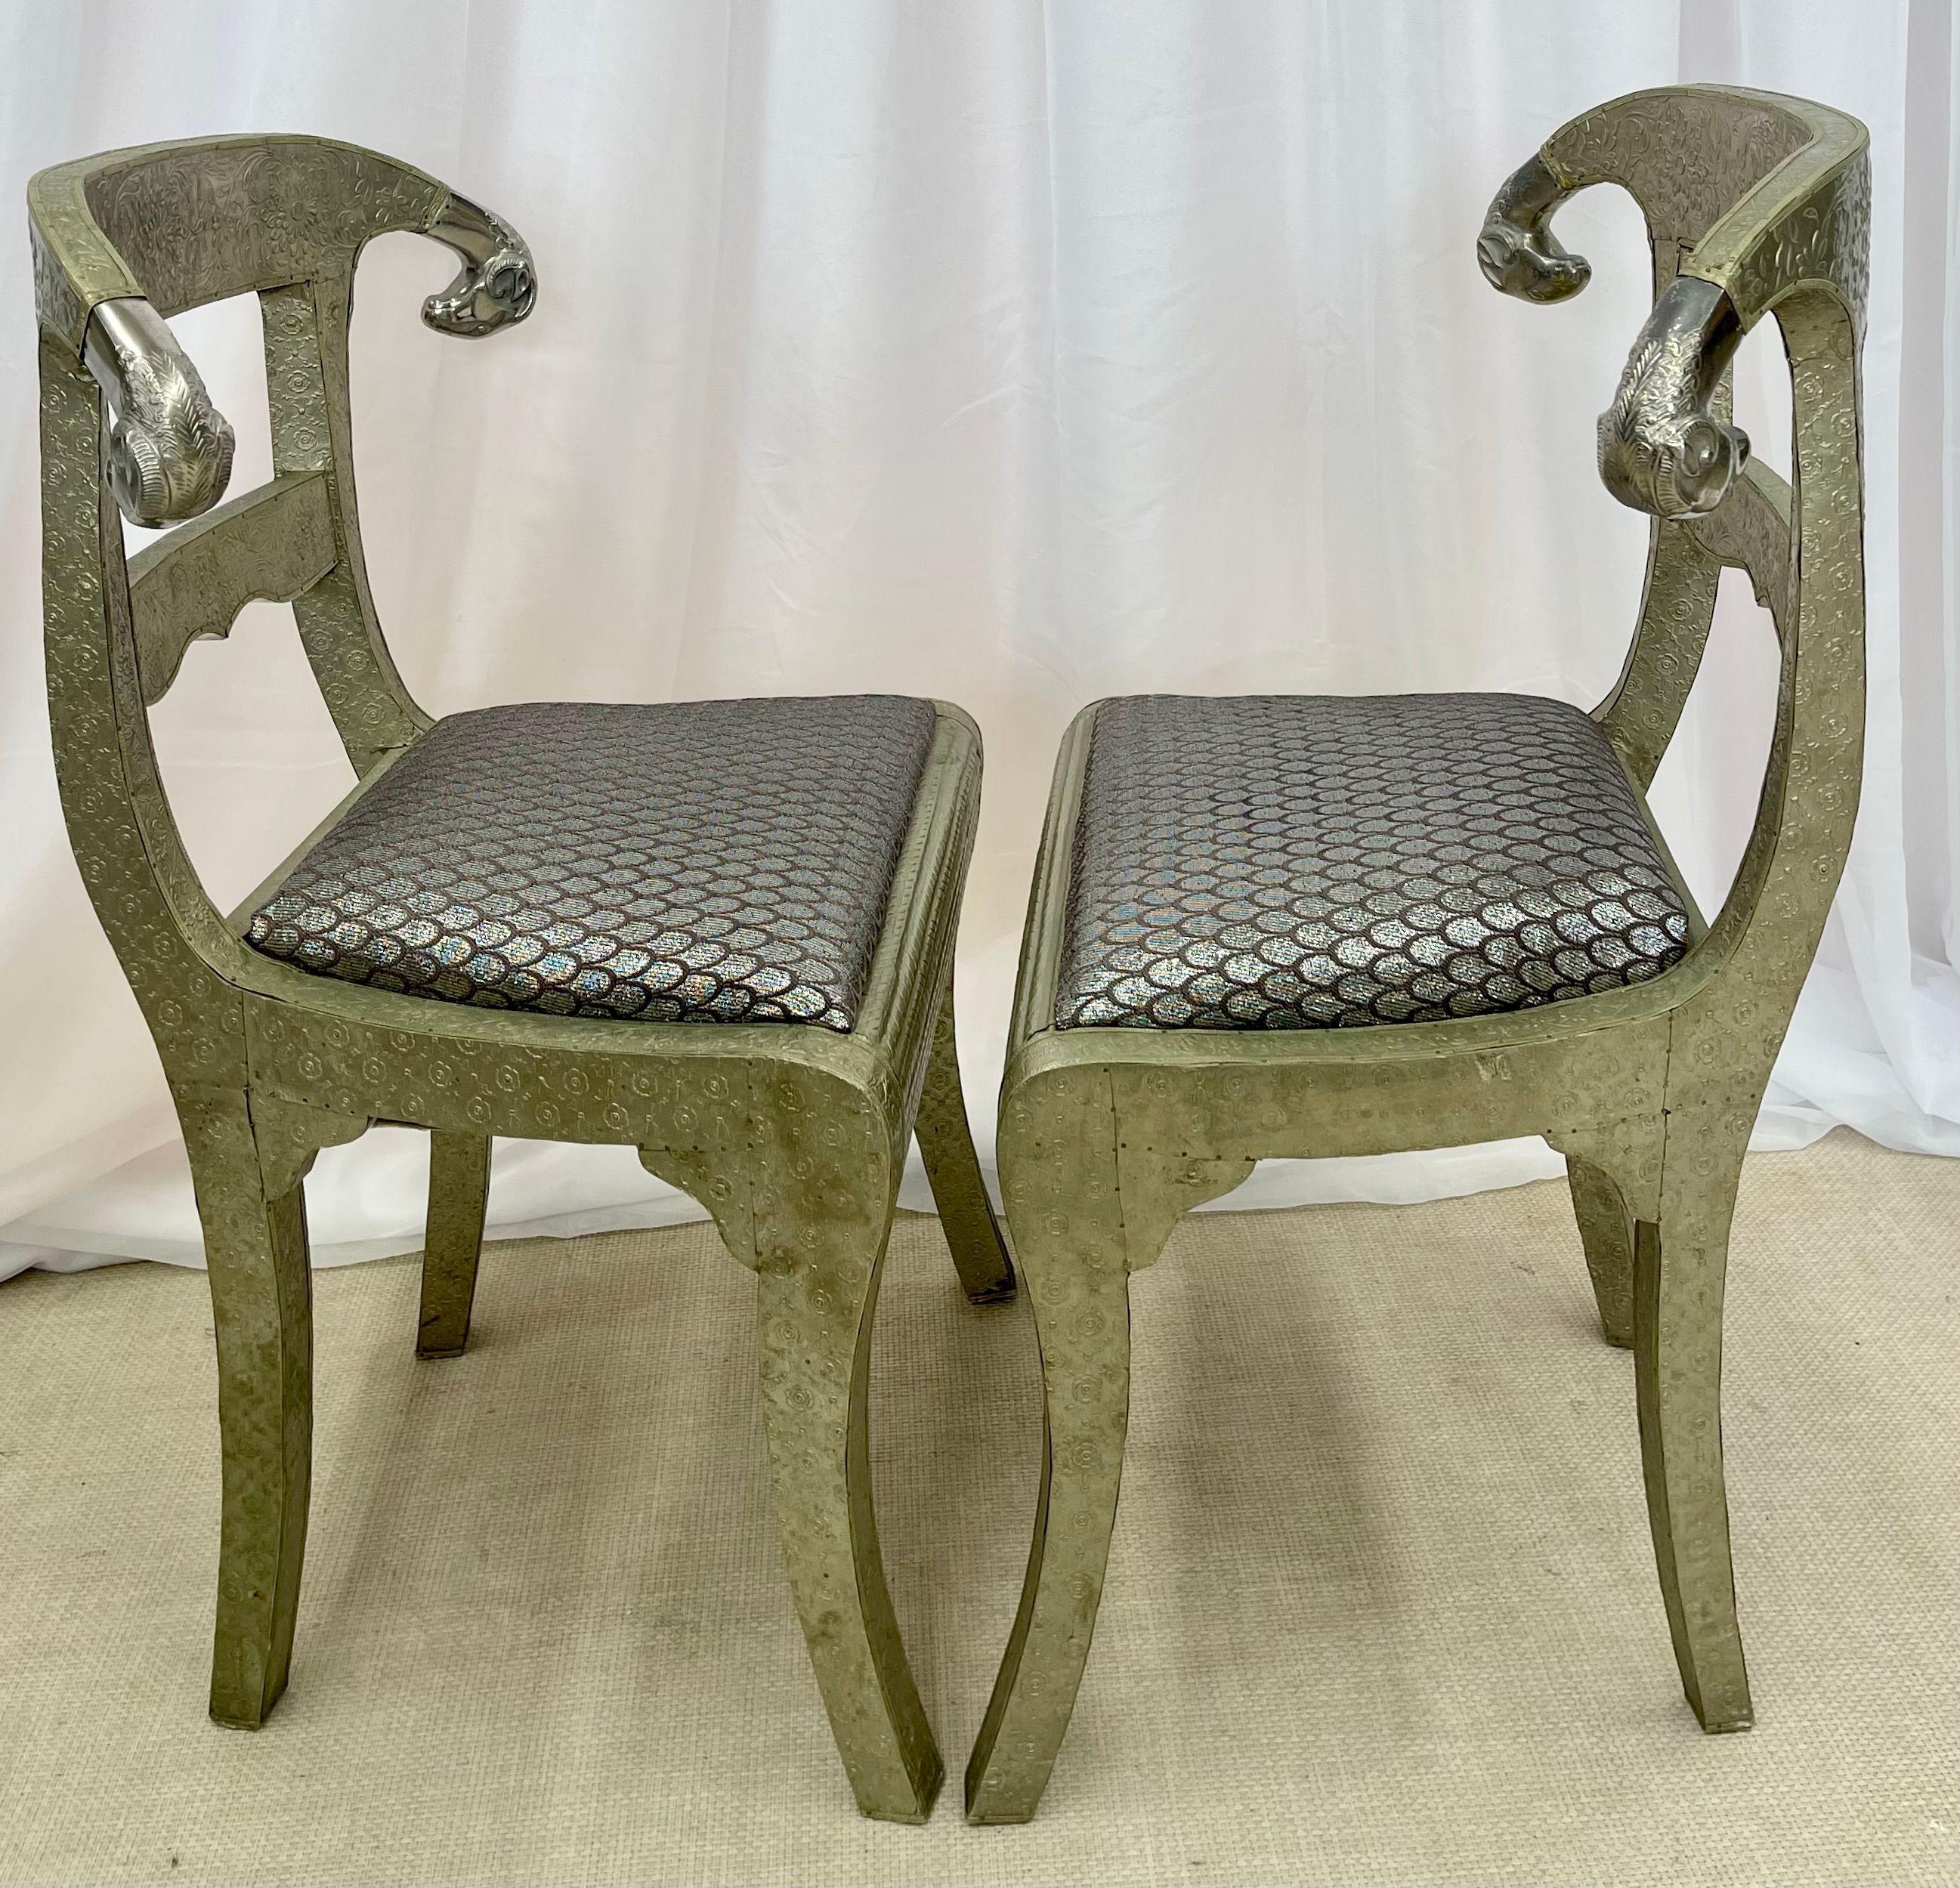 Pair of Neoclassical Side Chairs, Wrapped Metal, Rams Heads, European, Gustavian For Sale 1